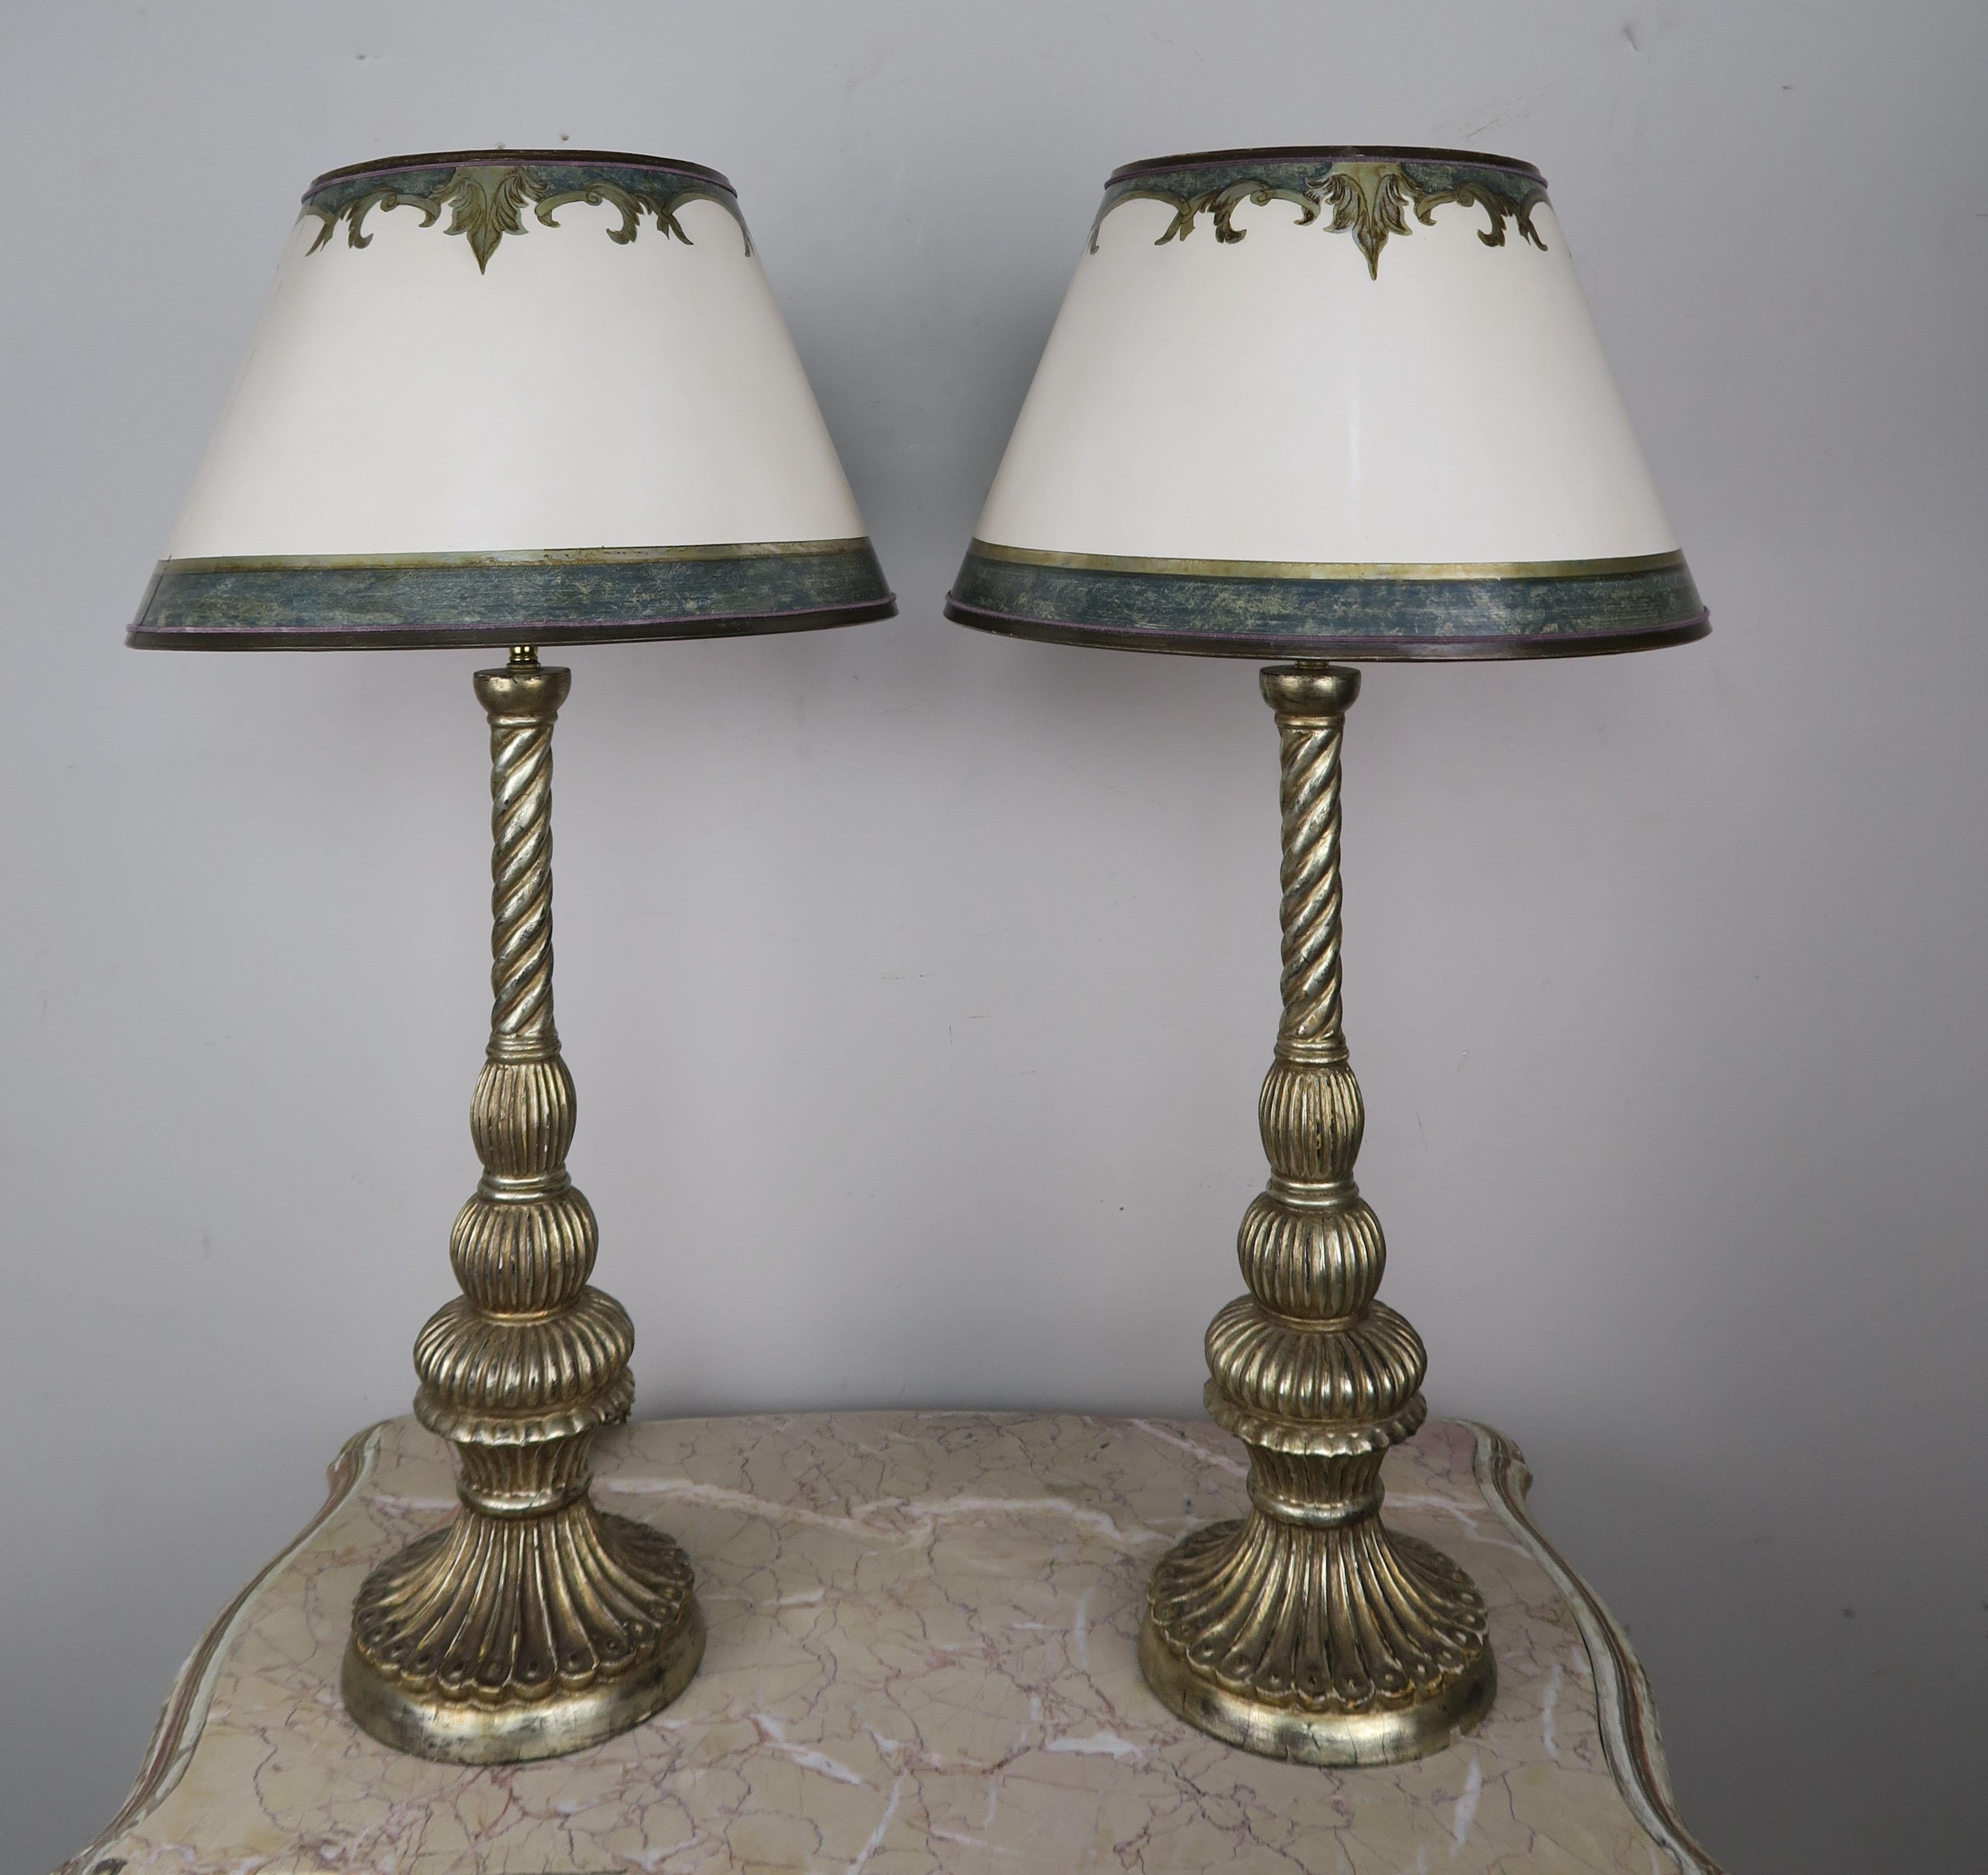 Pair of custom lamps made with carved wood antique Borghese finished bases crowned with hand painted parchment shades. The lamps are wired with double adjustable harps and are both in working condition.